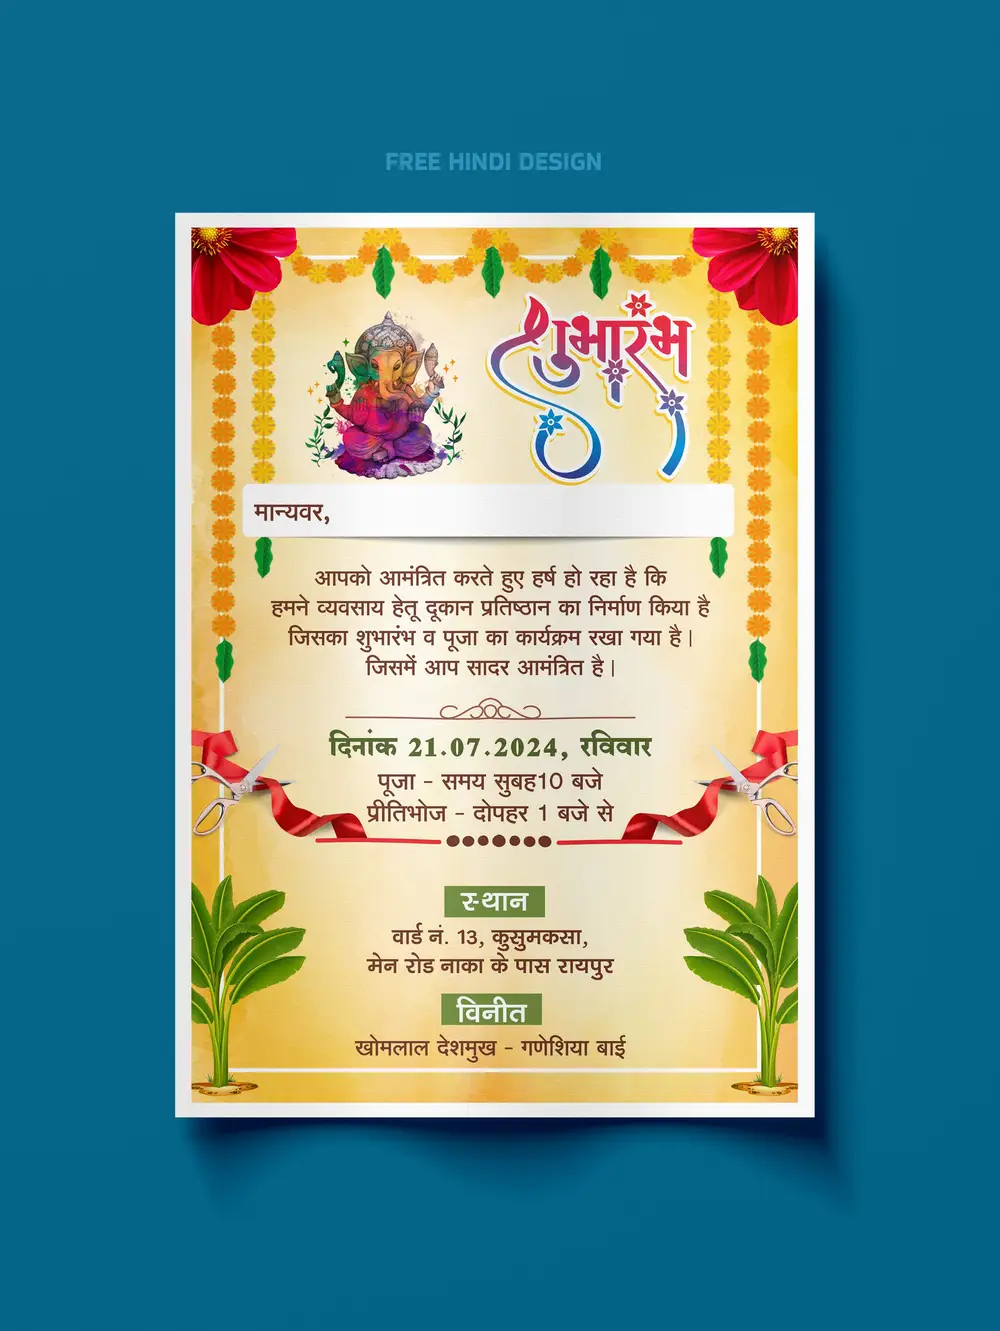 Shop opening and pooja invitation card download 190724